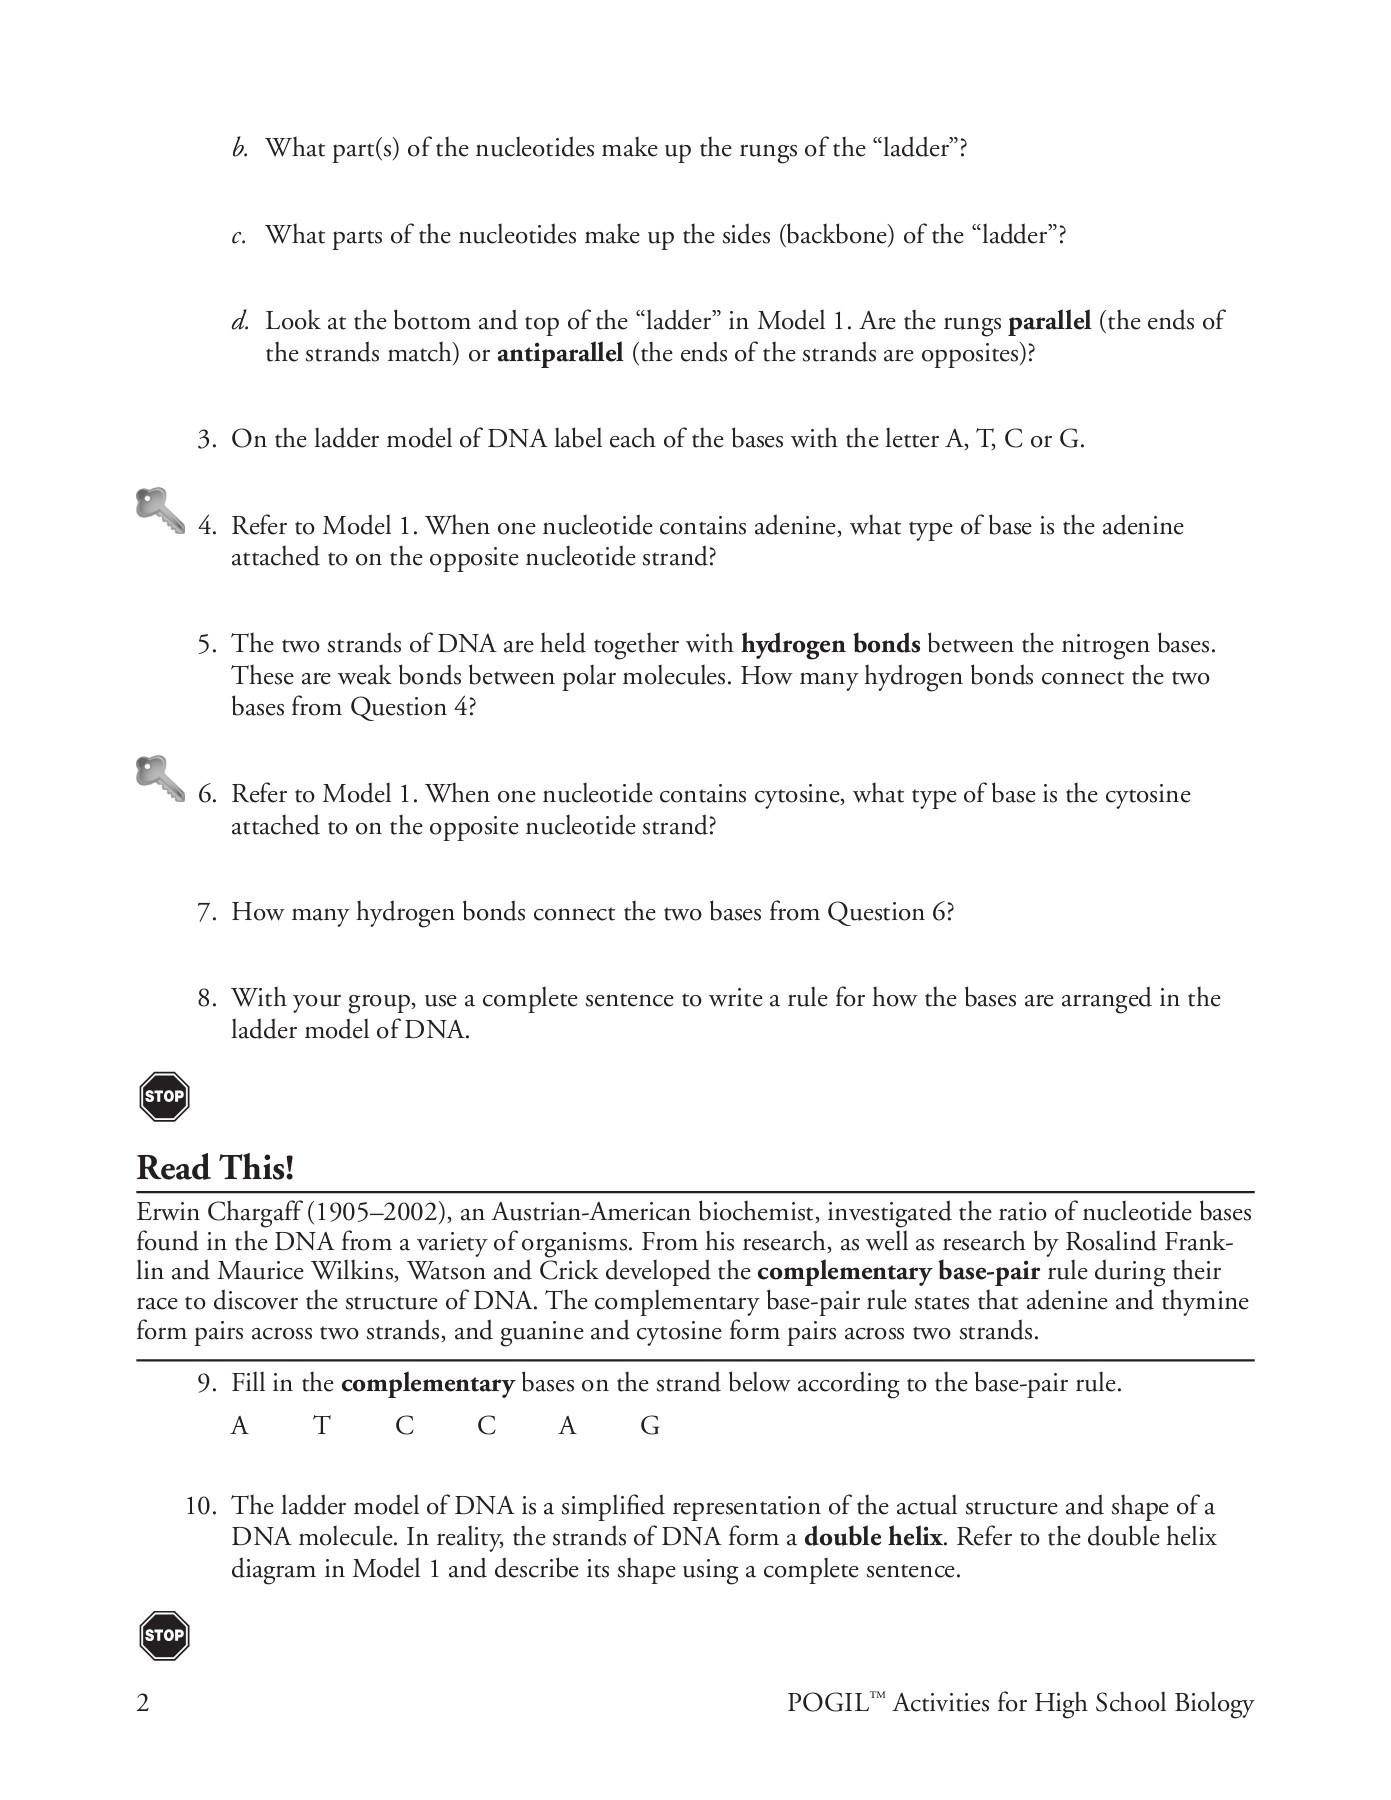 Dna the Double Helix Worksheet Dna Structure and Replication Pages 1 5 Text Version